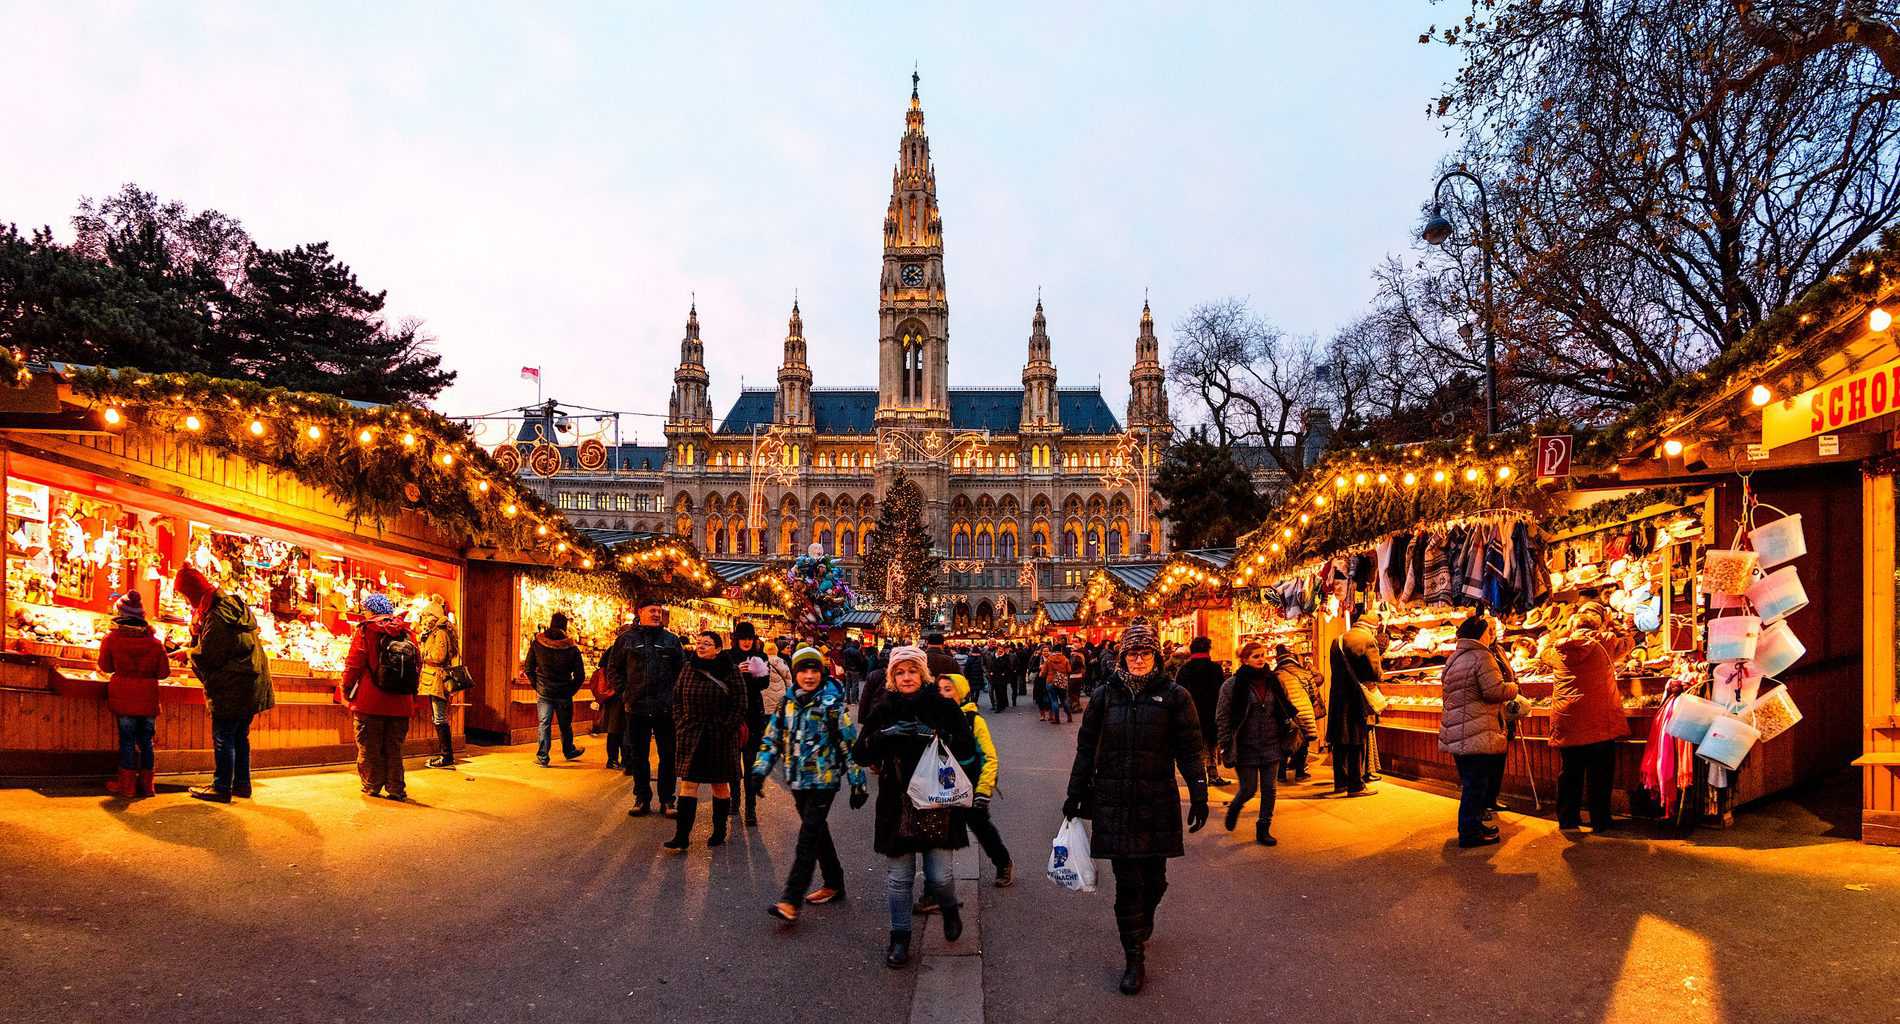 The charming, holiday vives you get from the Nuremberg Christmas Market. 